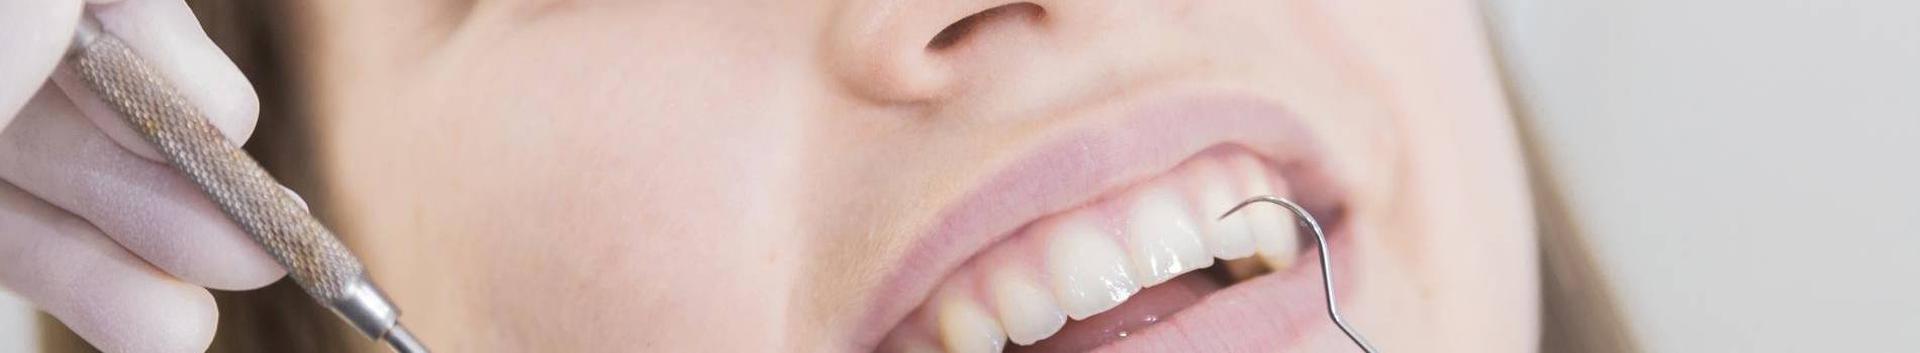 dental care and other related services, products, consultations